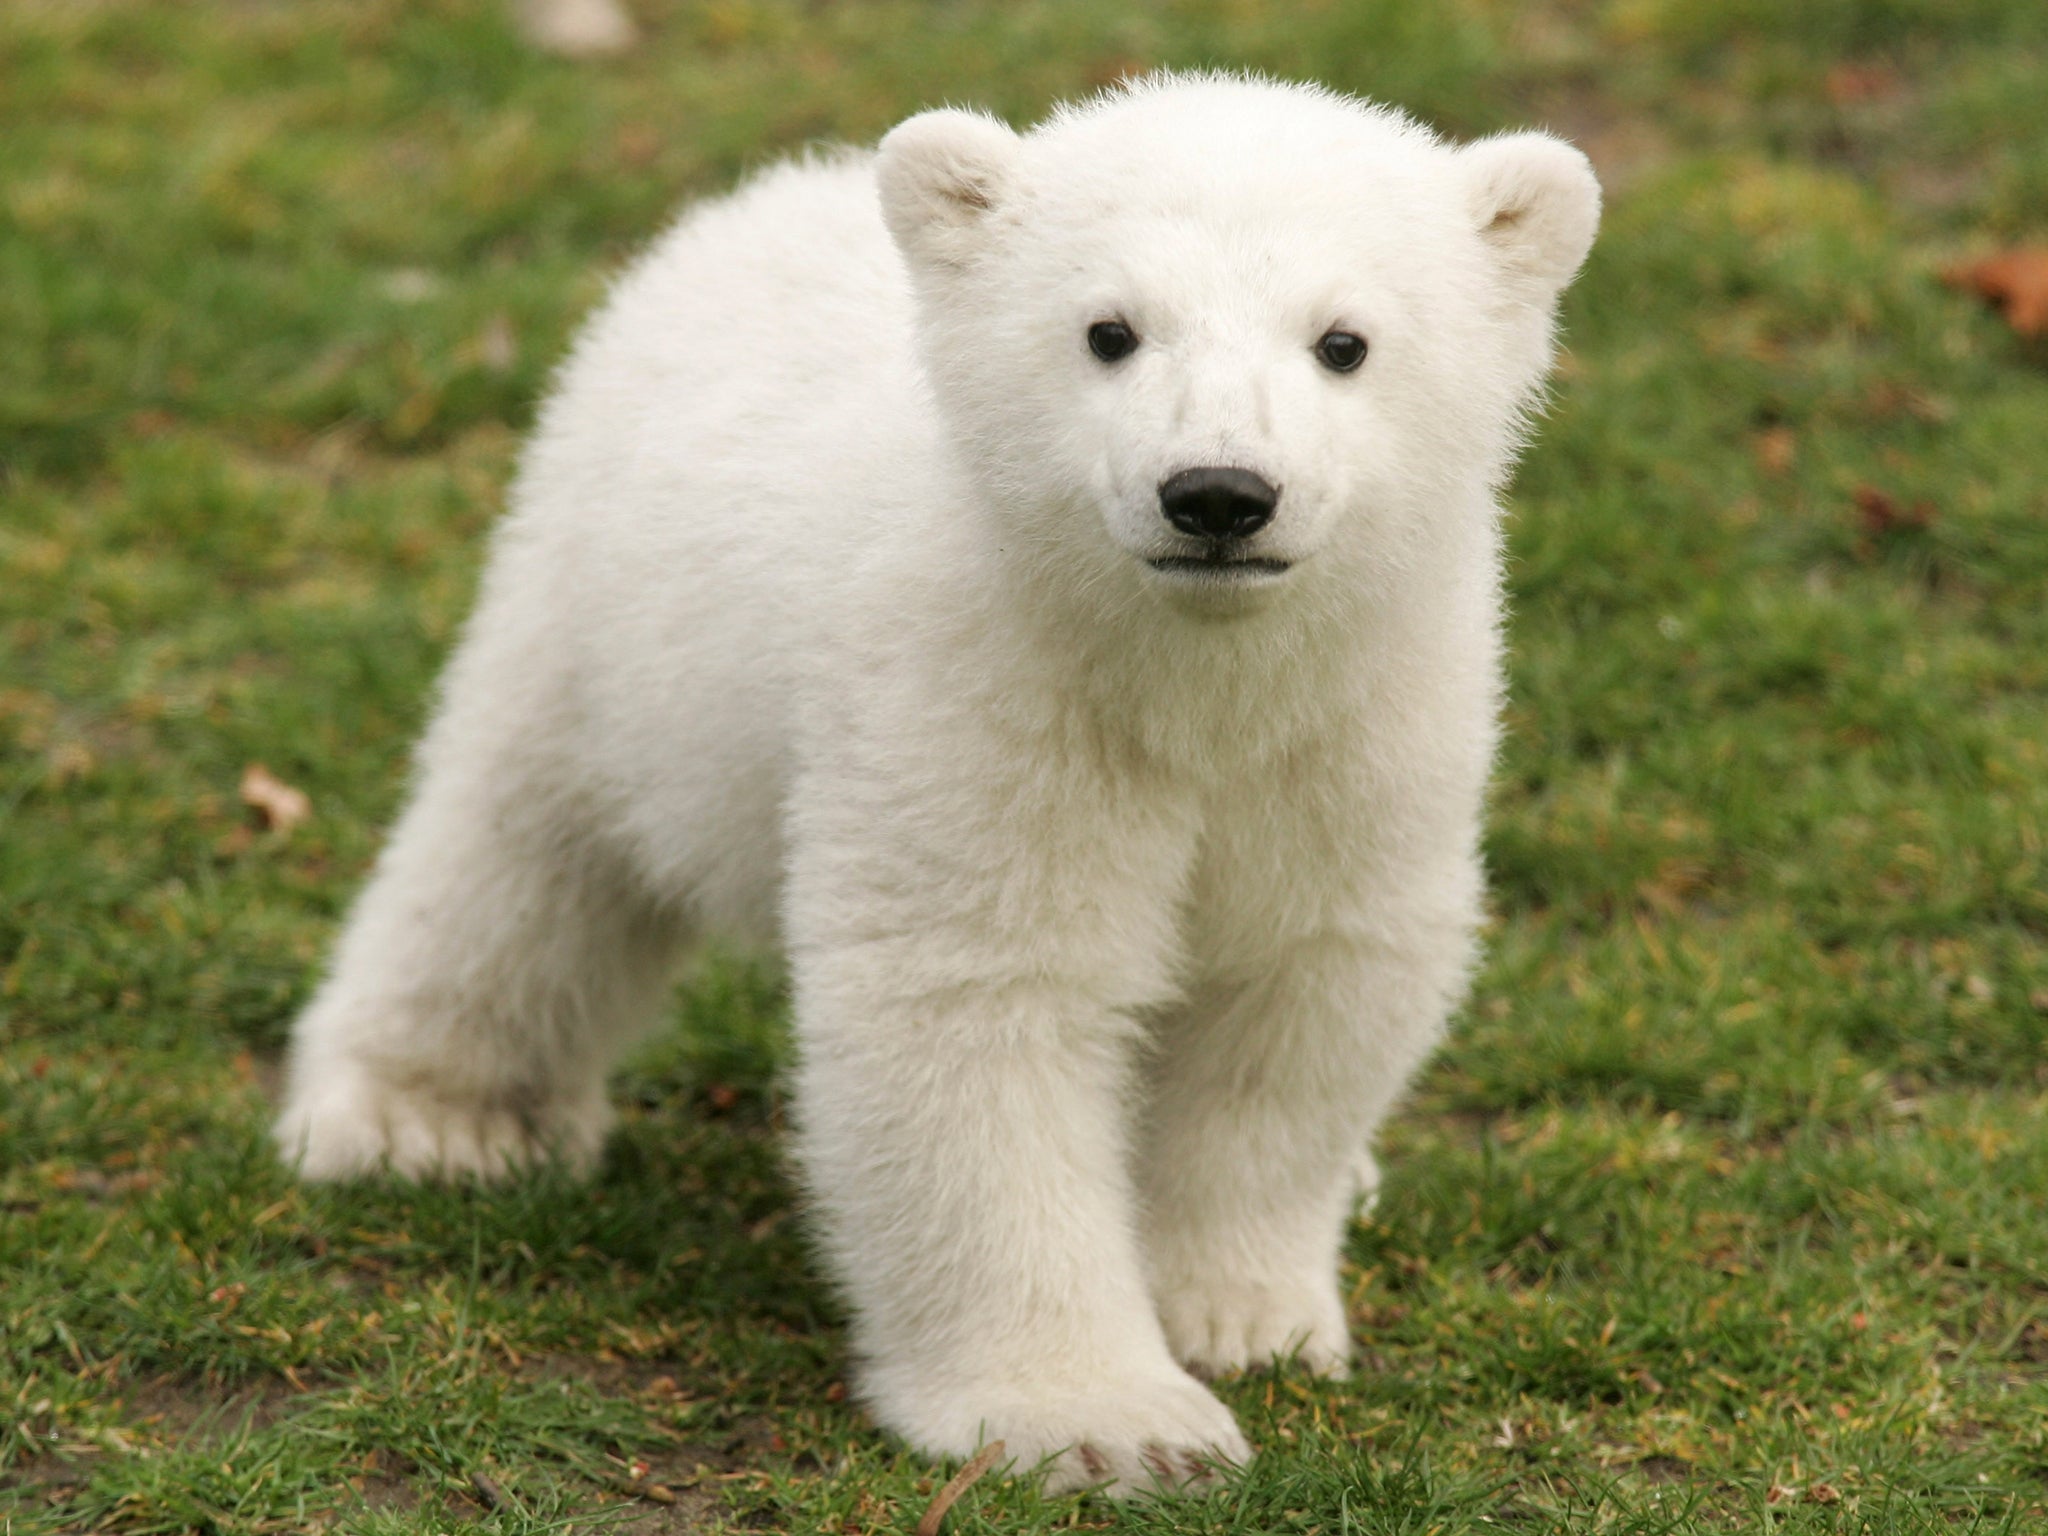 Knut's first appearances saw attendances at the zoo soar (Getty)